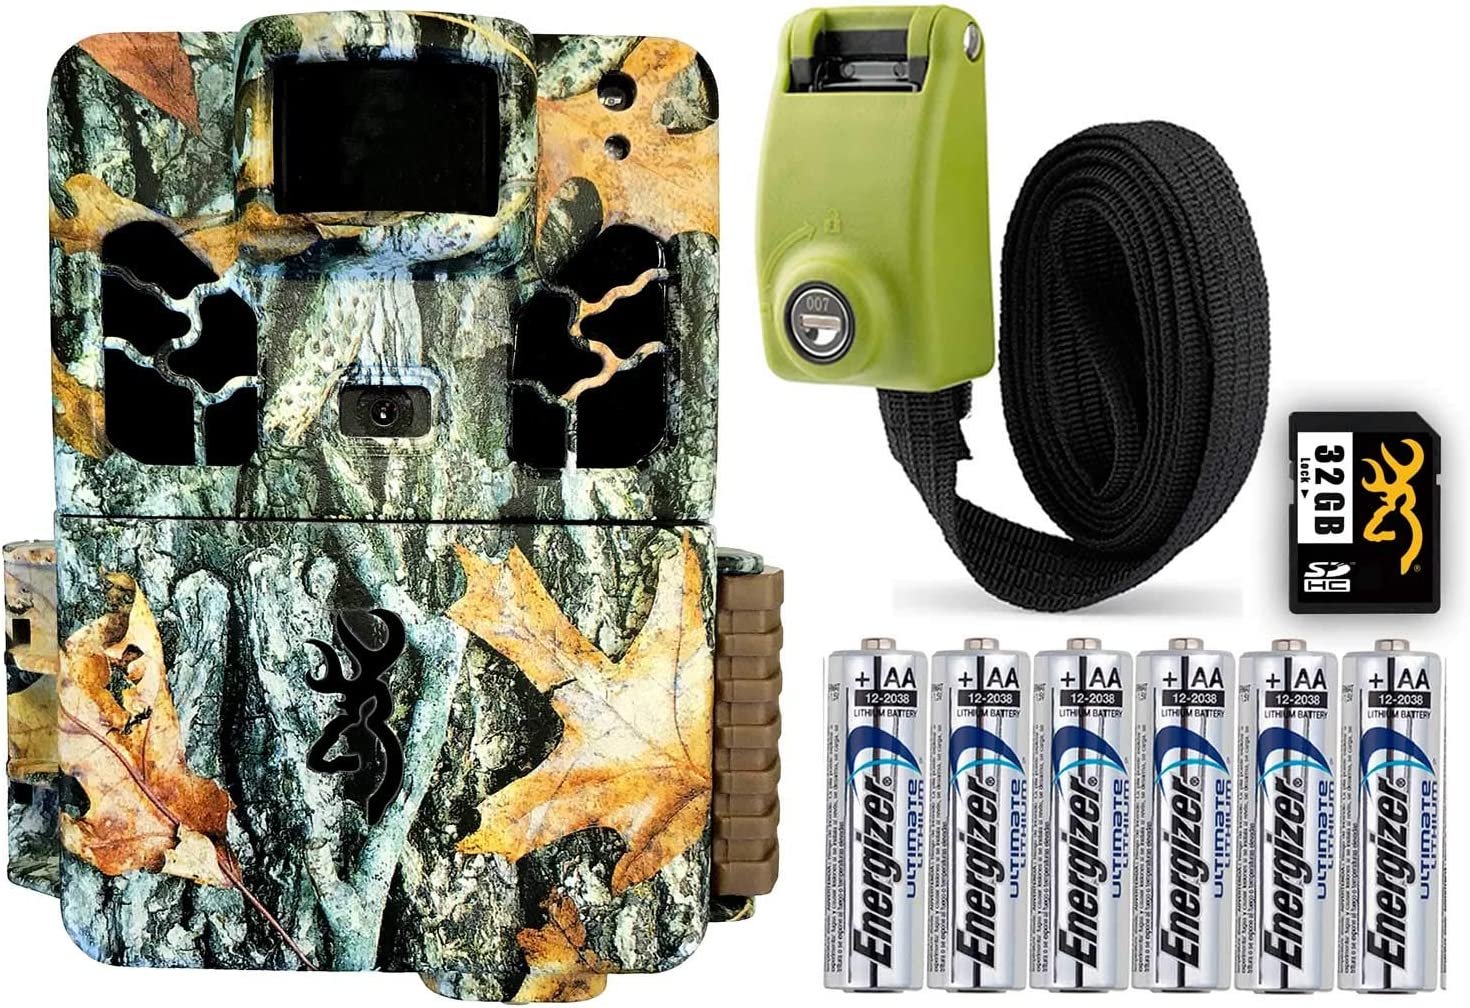 Browning Dark Ops Apex Trail Camera 18MP with Browning SD Card, Batteries, and Reinforced Strap - image 1 of 7